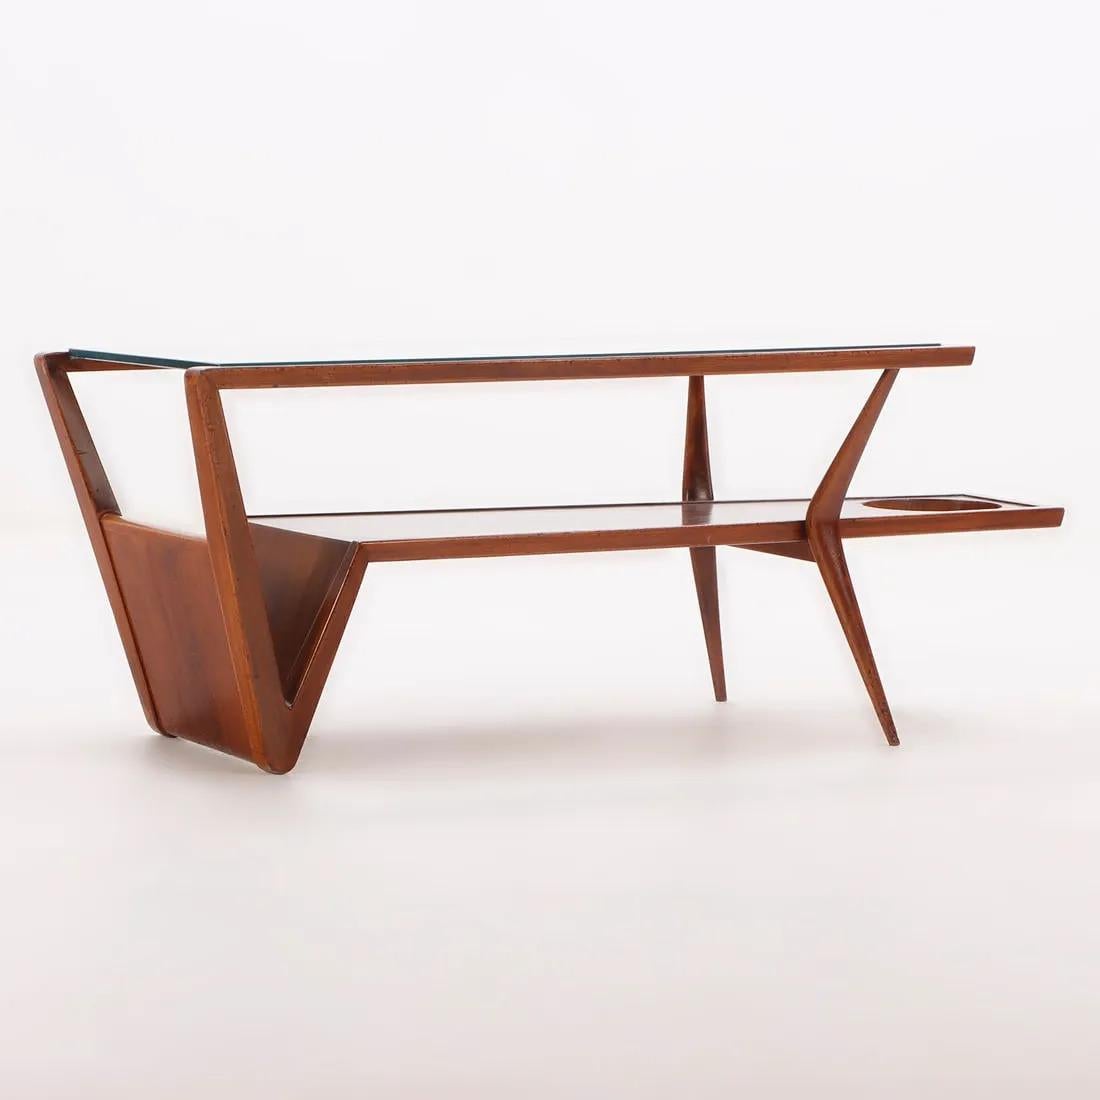 Mid Century Modern walnut and glass coffee table with an angular design and magazine holder.  The round hole in the coffee table is for an ice bucket (not included).